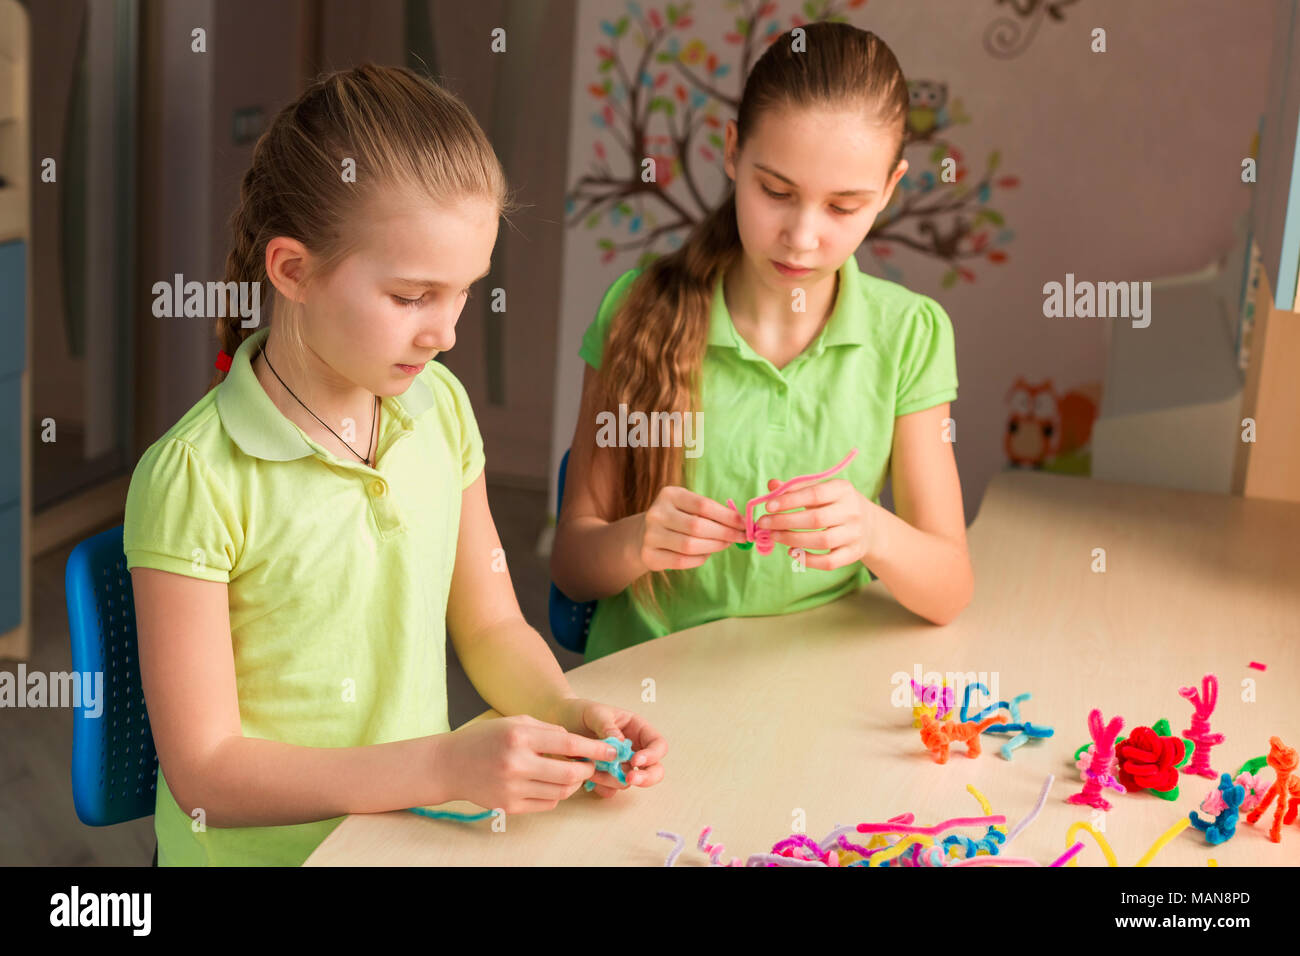 Cute little girls creating toys with chenille sticks at the table. Creativity and handmade concept. Stock Photo